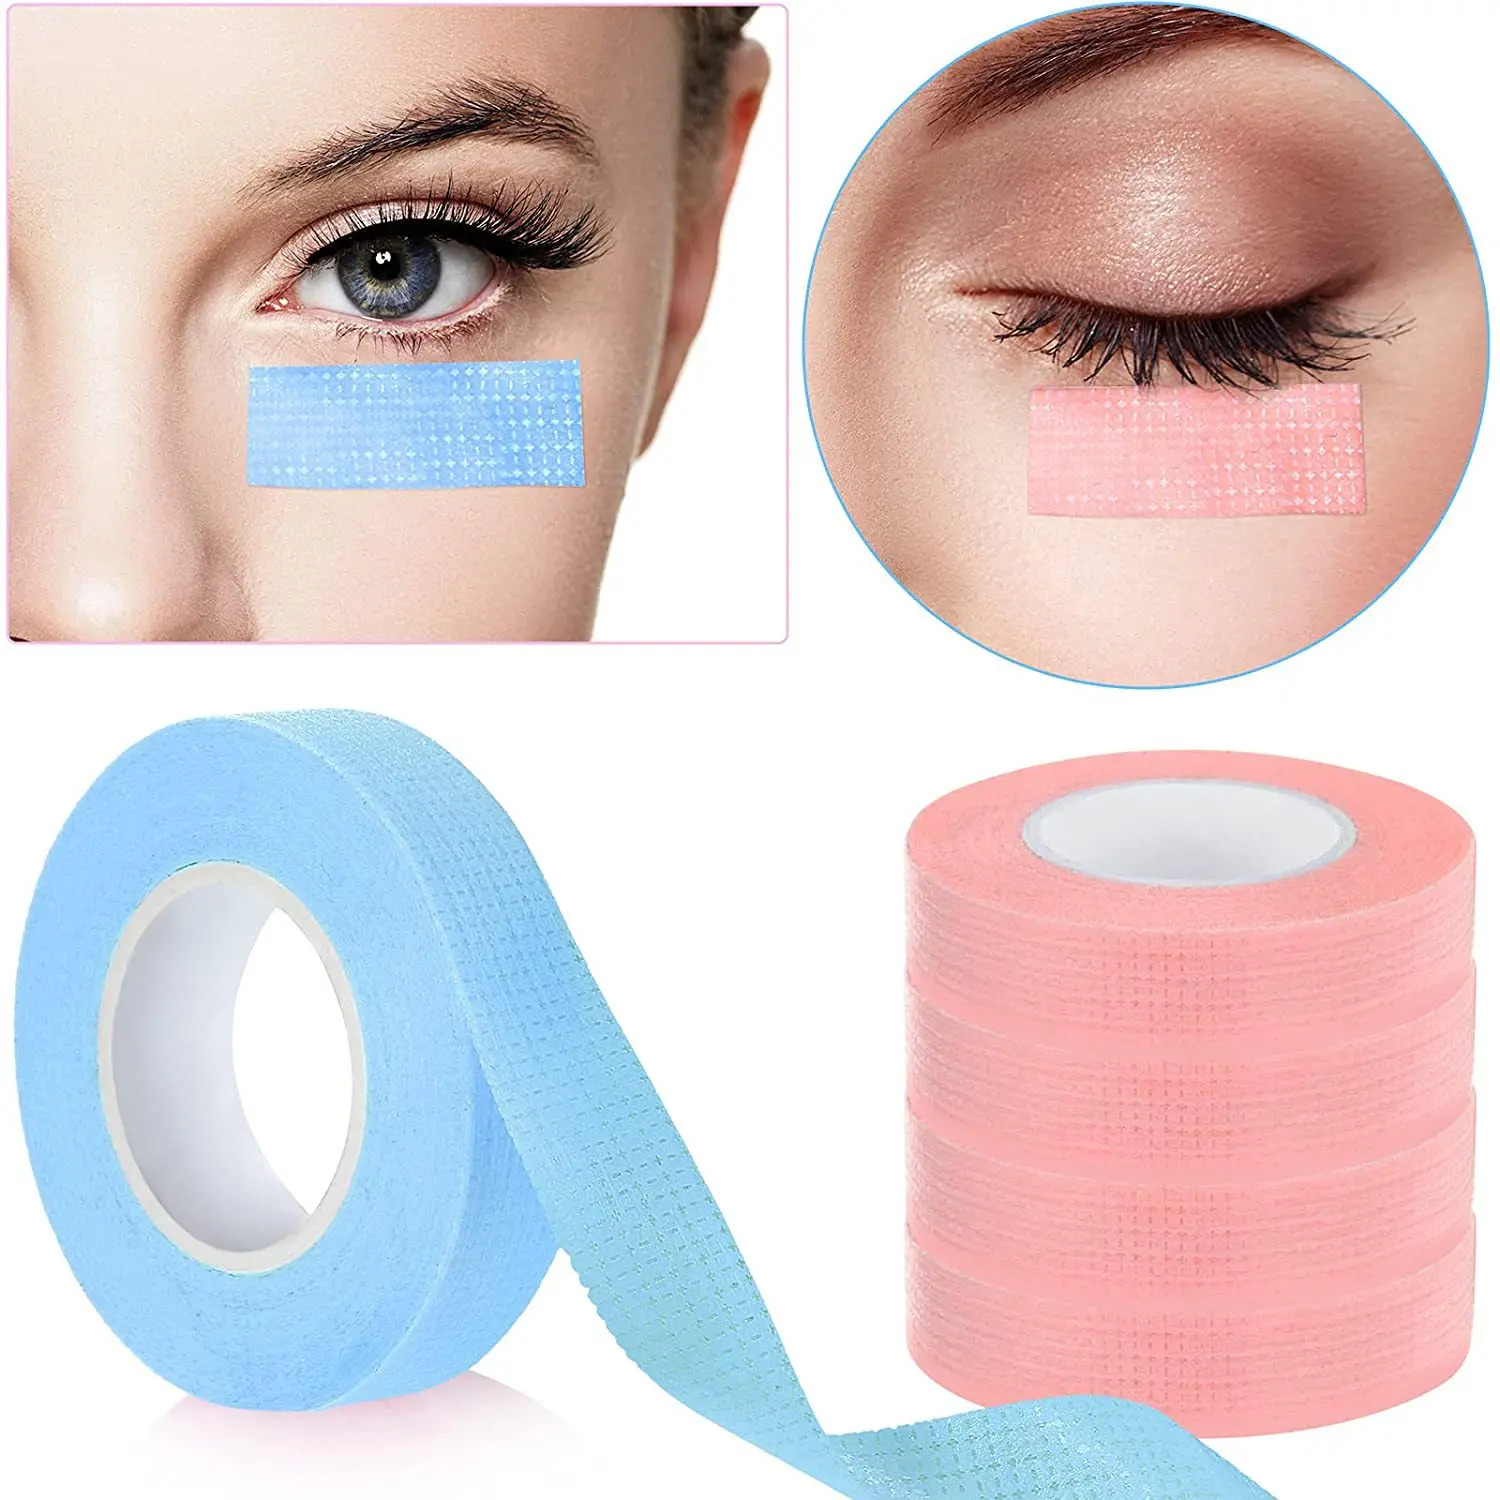 New Silicone Gel Tape Sensitive Sticky Medical Pink Eyelash Extension Tape  - Buy New Silicone Gel Tape Sensitive Sticky Medical Pink Eyelash Extension  Tape Product on